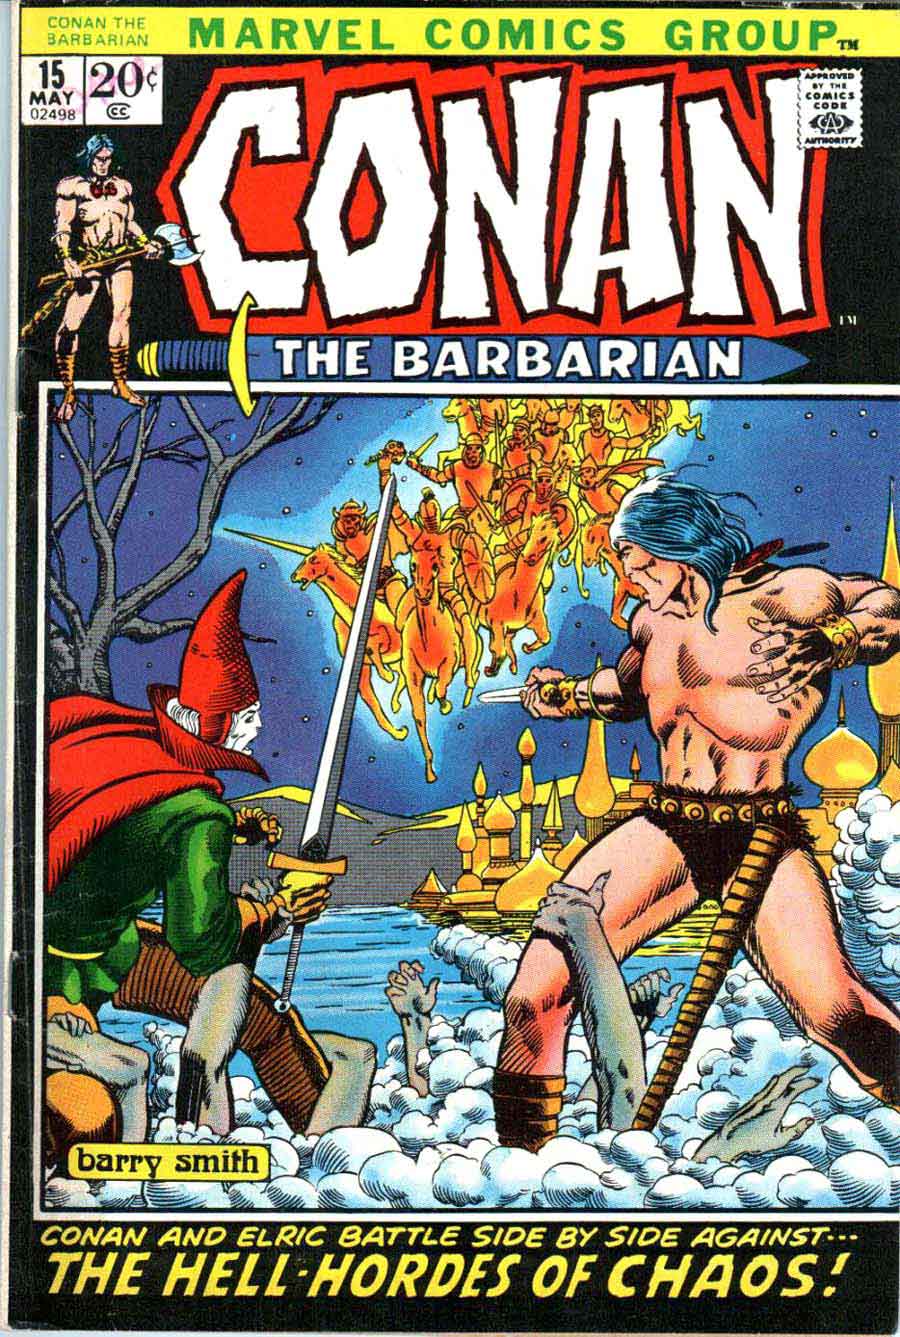 Conan the Barbarian v1 #15 marvel comic book cover art by Barry Windsor Smith